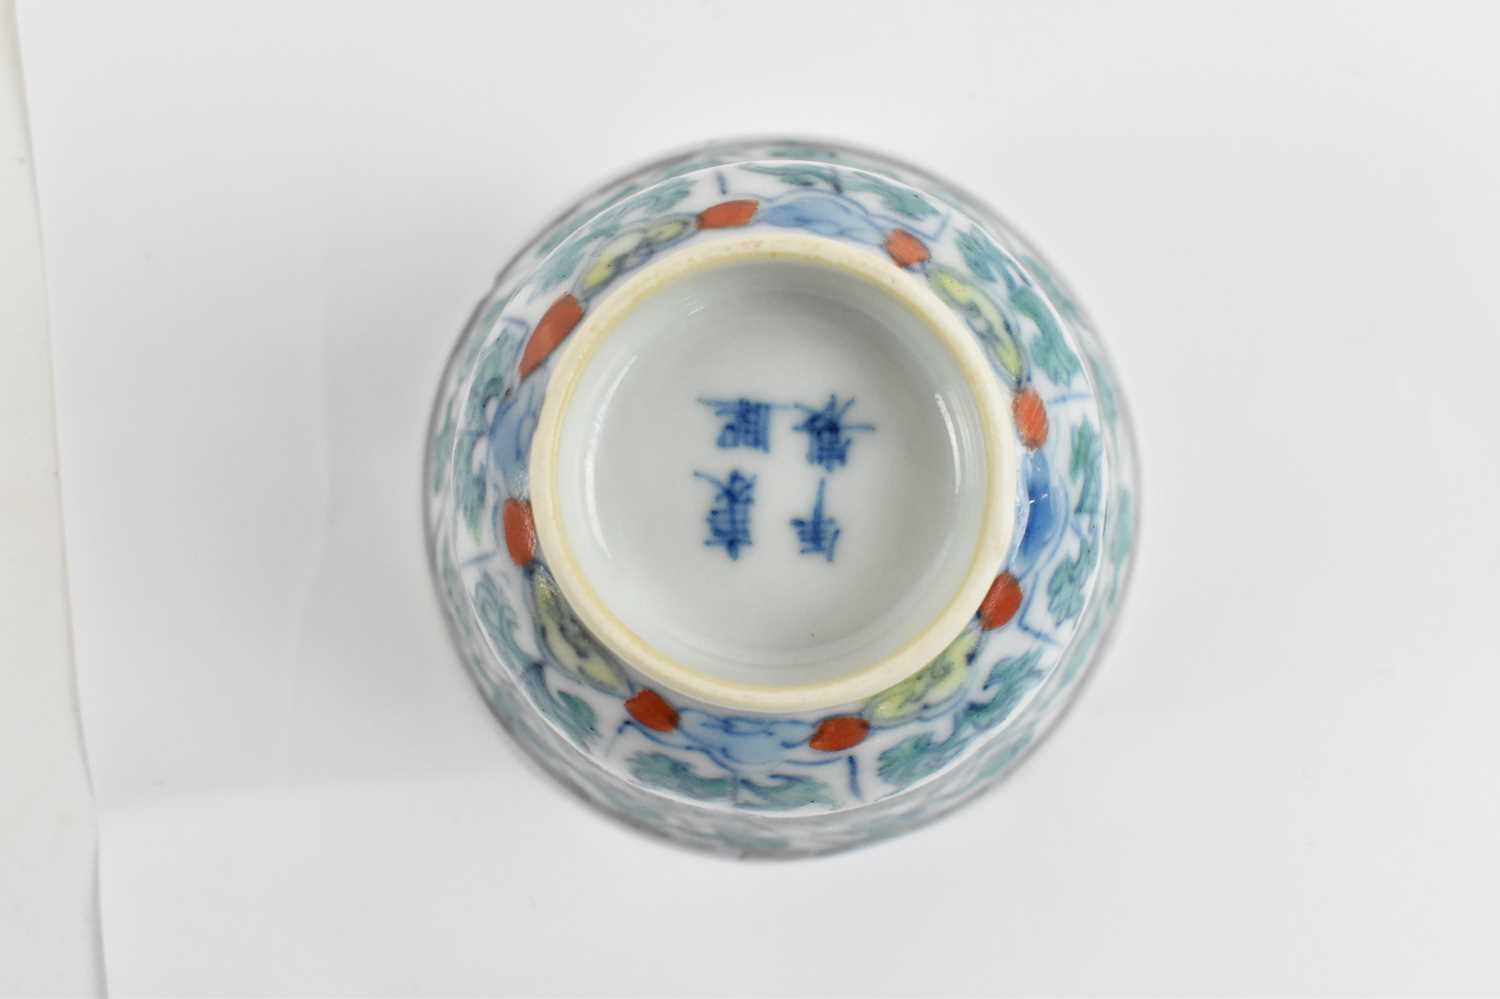 A pair of Chinese Republic period porcelain bowls, painted in enamels and decorated with lotus - Image 2 of 3